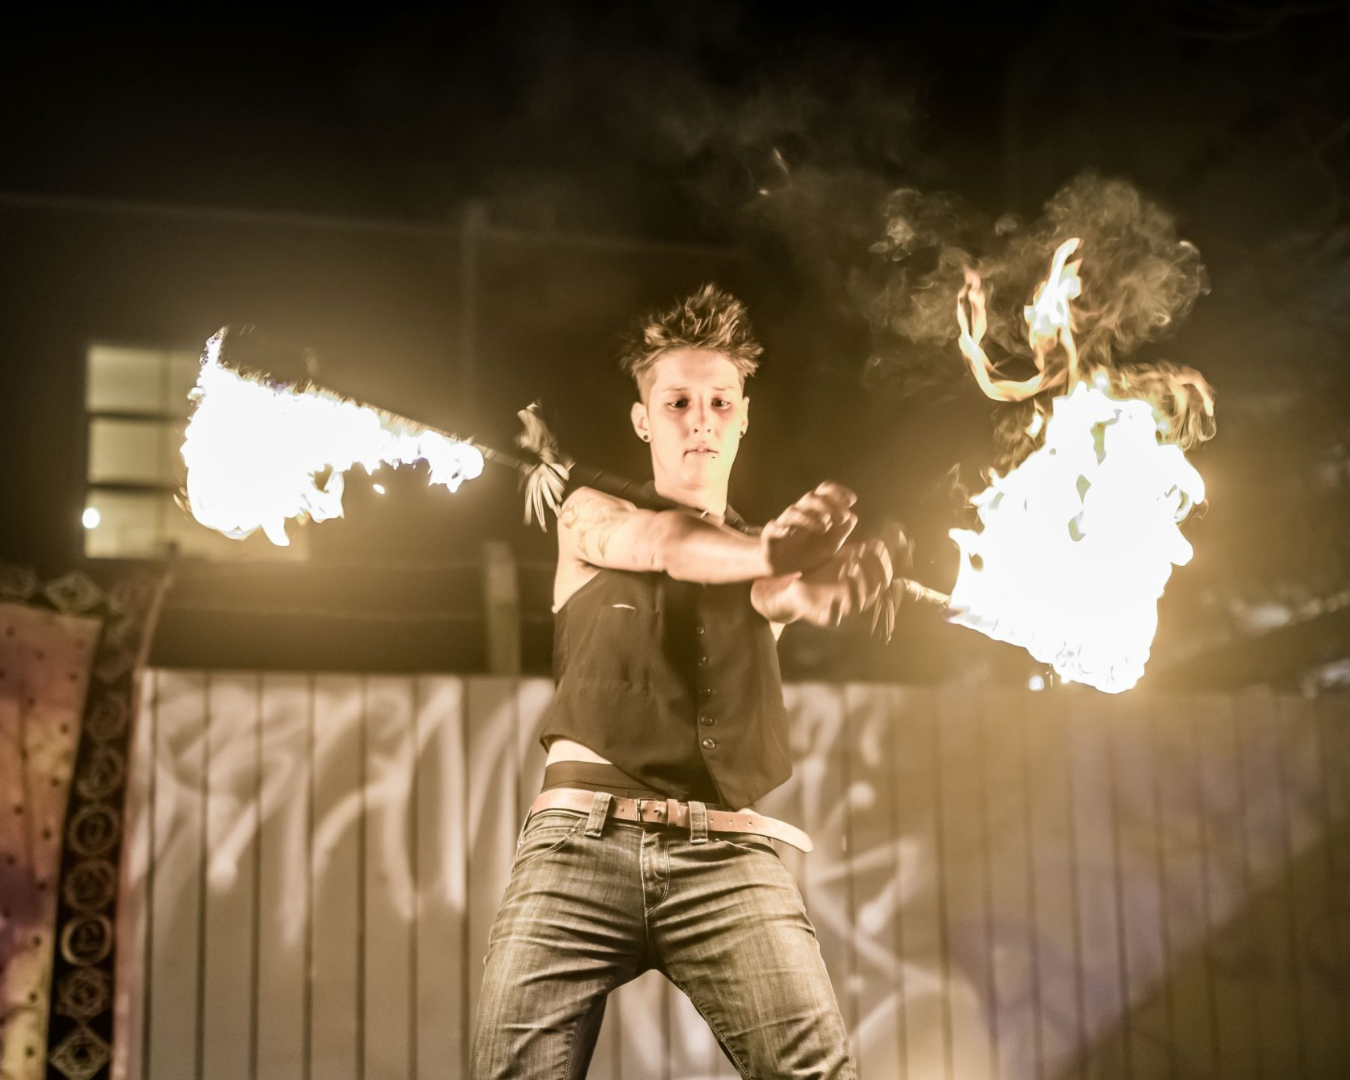 A person performing an act with fire